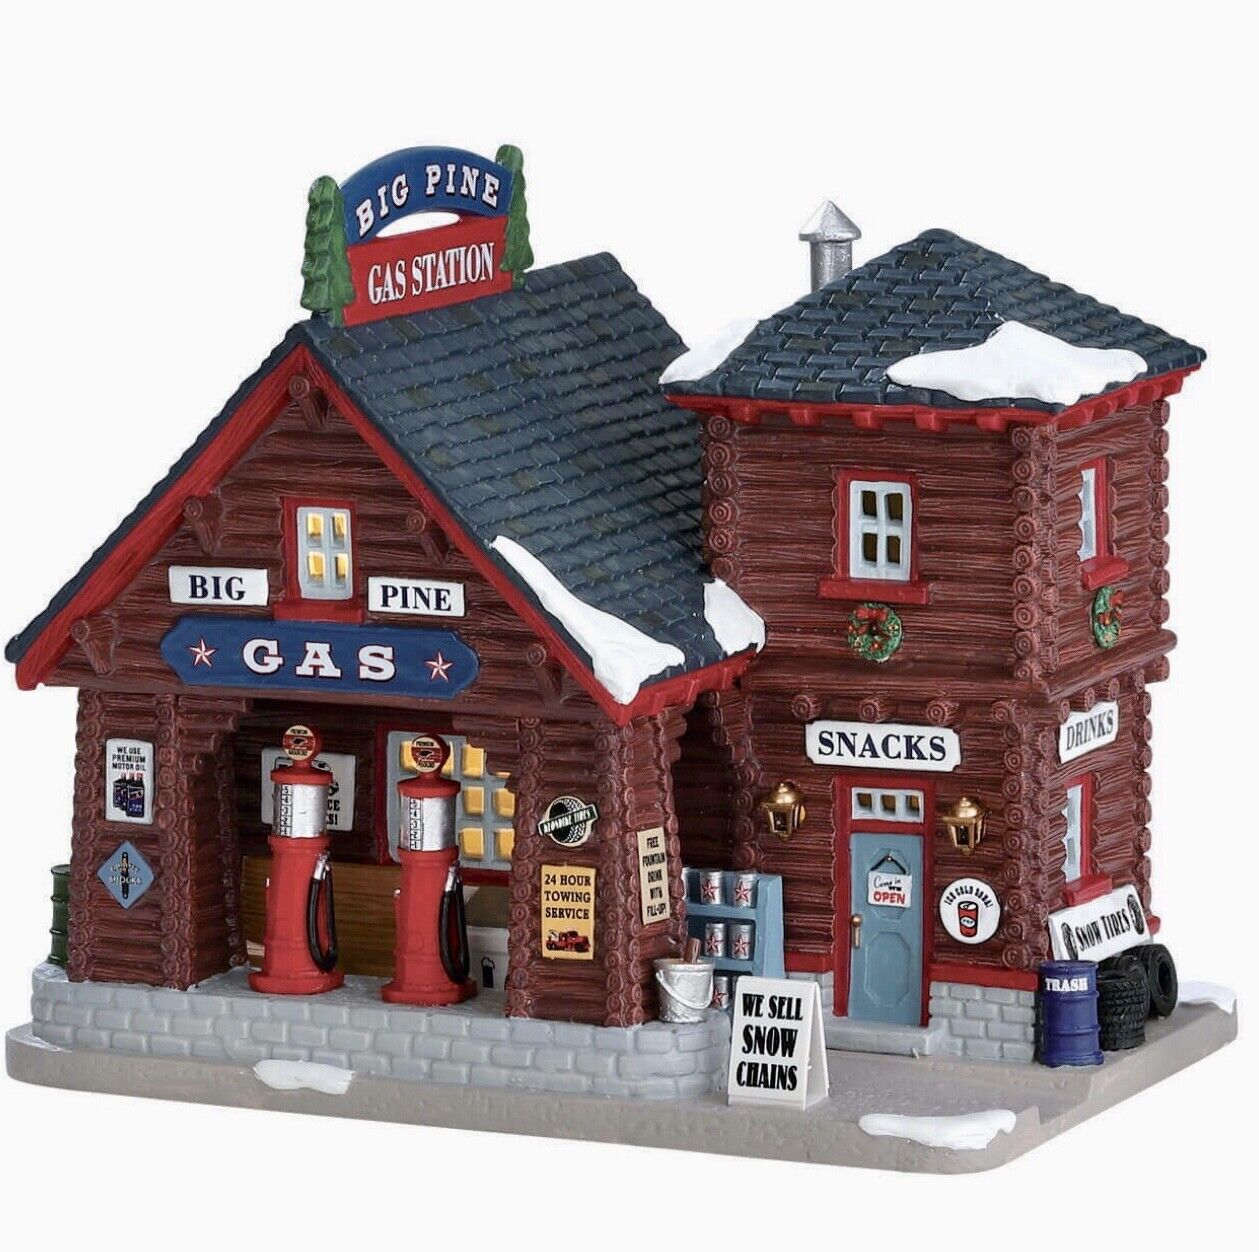 Lemax Big Pine Gas Station #75205 Vail Village Collection Lighted Building NEW